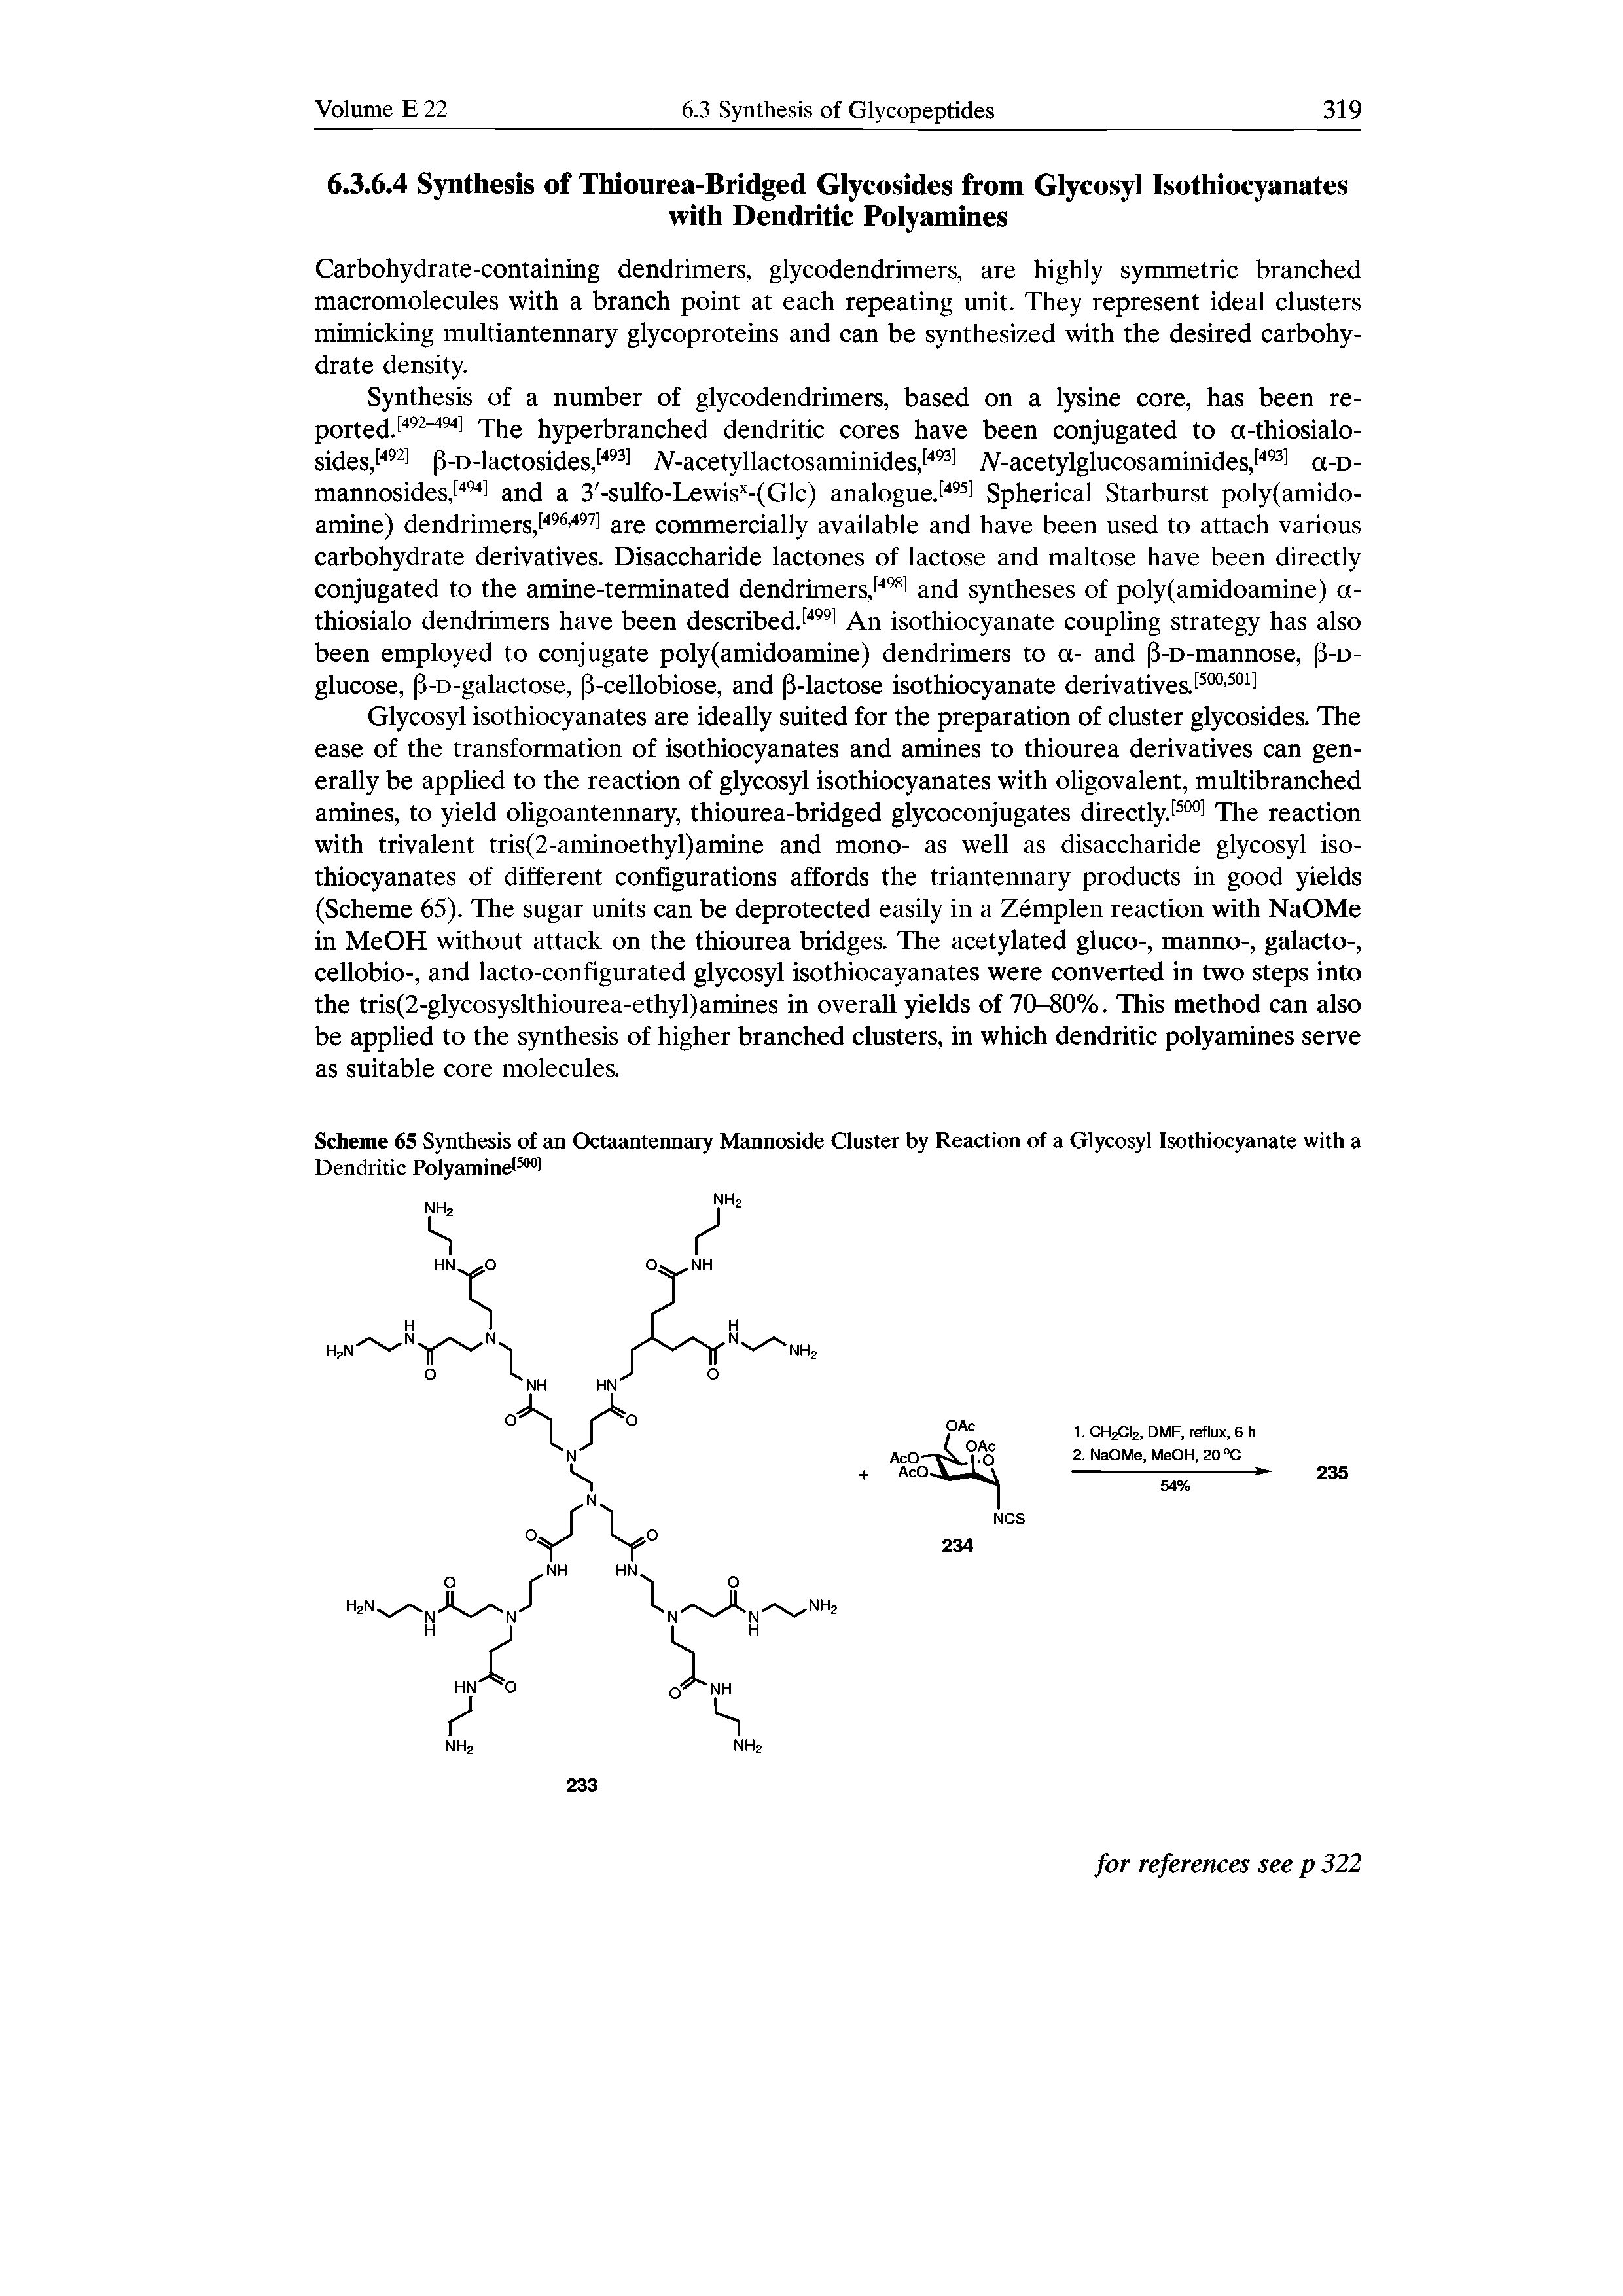 Scheme 65 Synthesis of an Octaantennary Mannoside Cluster by Reaction of a Glycosyl Isothiocyanate with a Dendritic Polyamine15001...